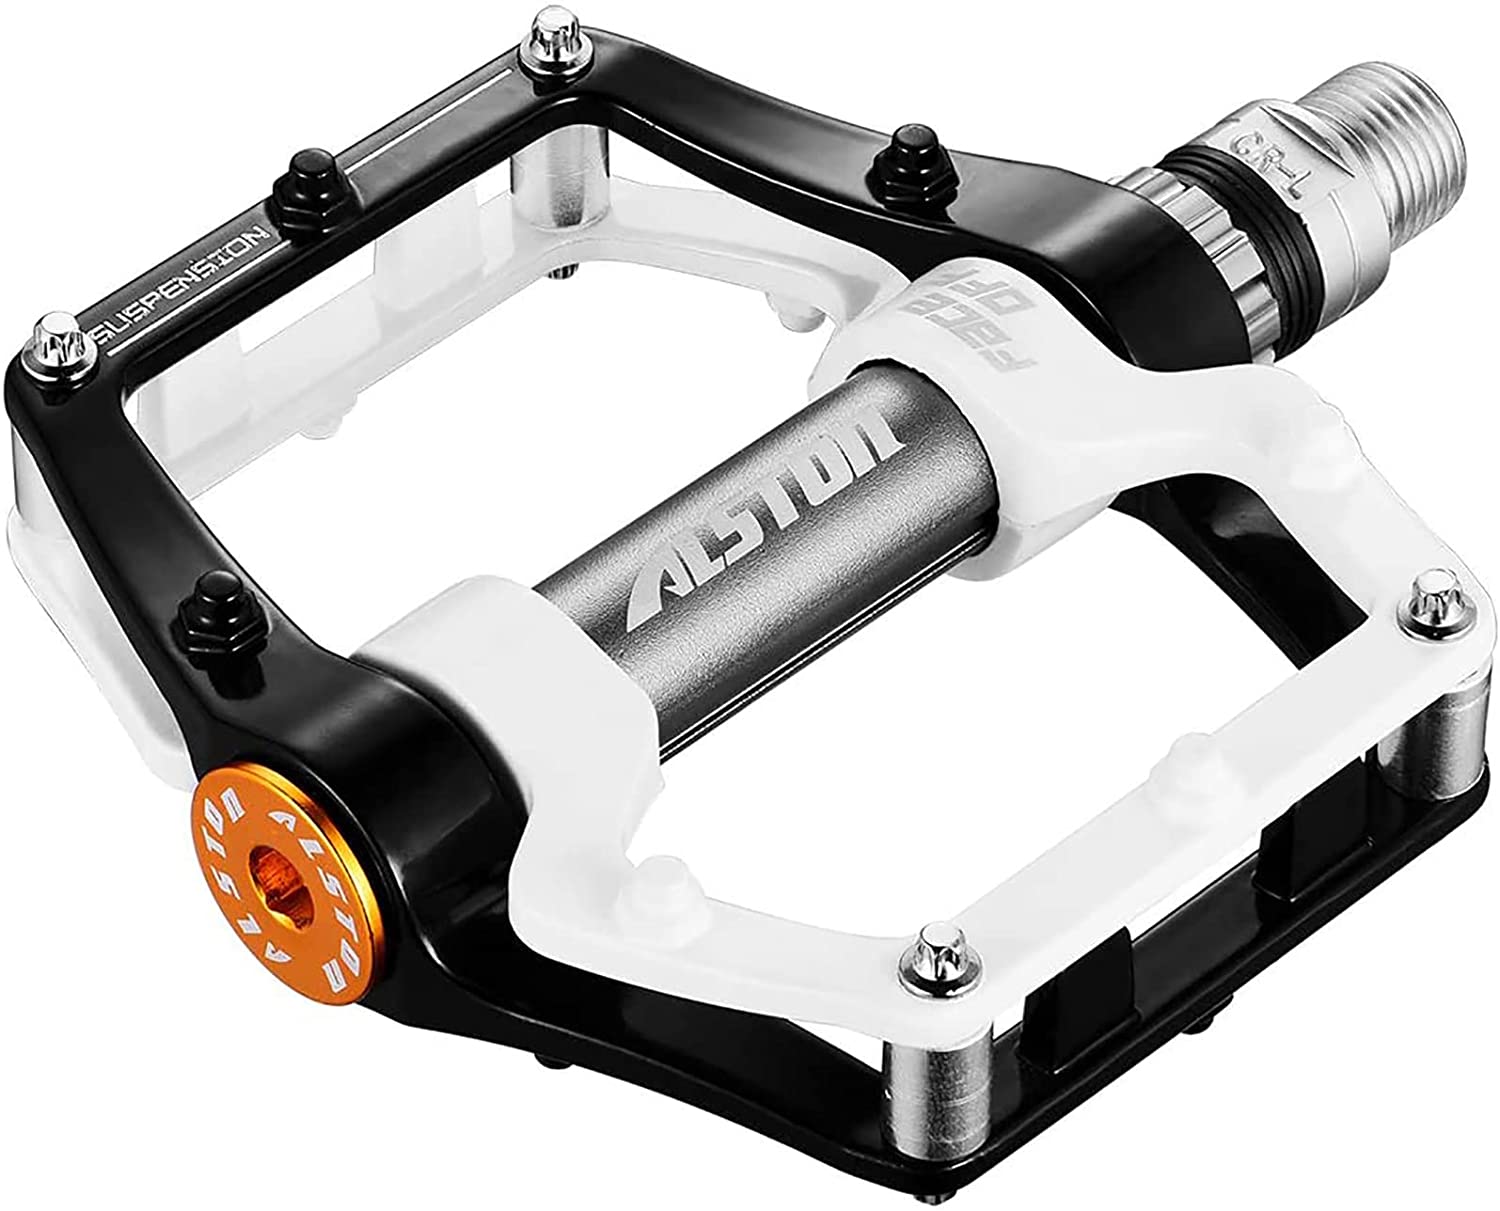 Alston Pedals for Bike Road Bicycle